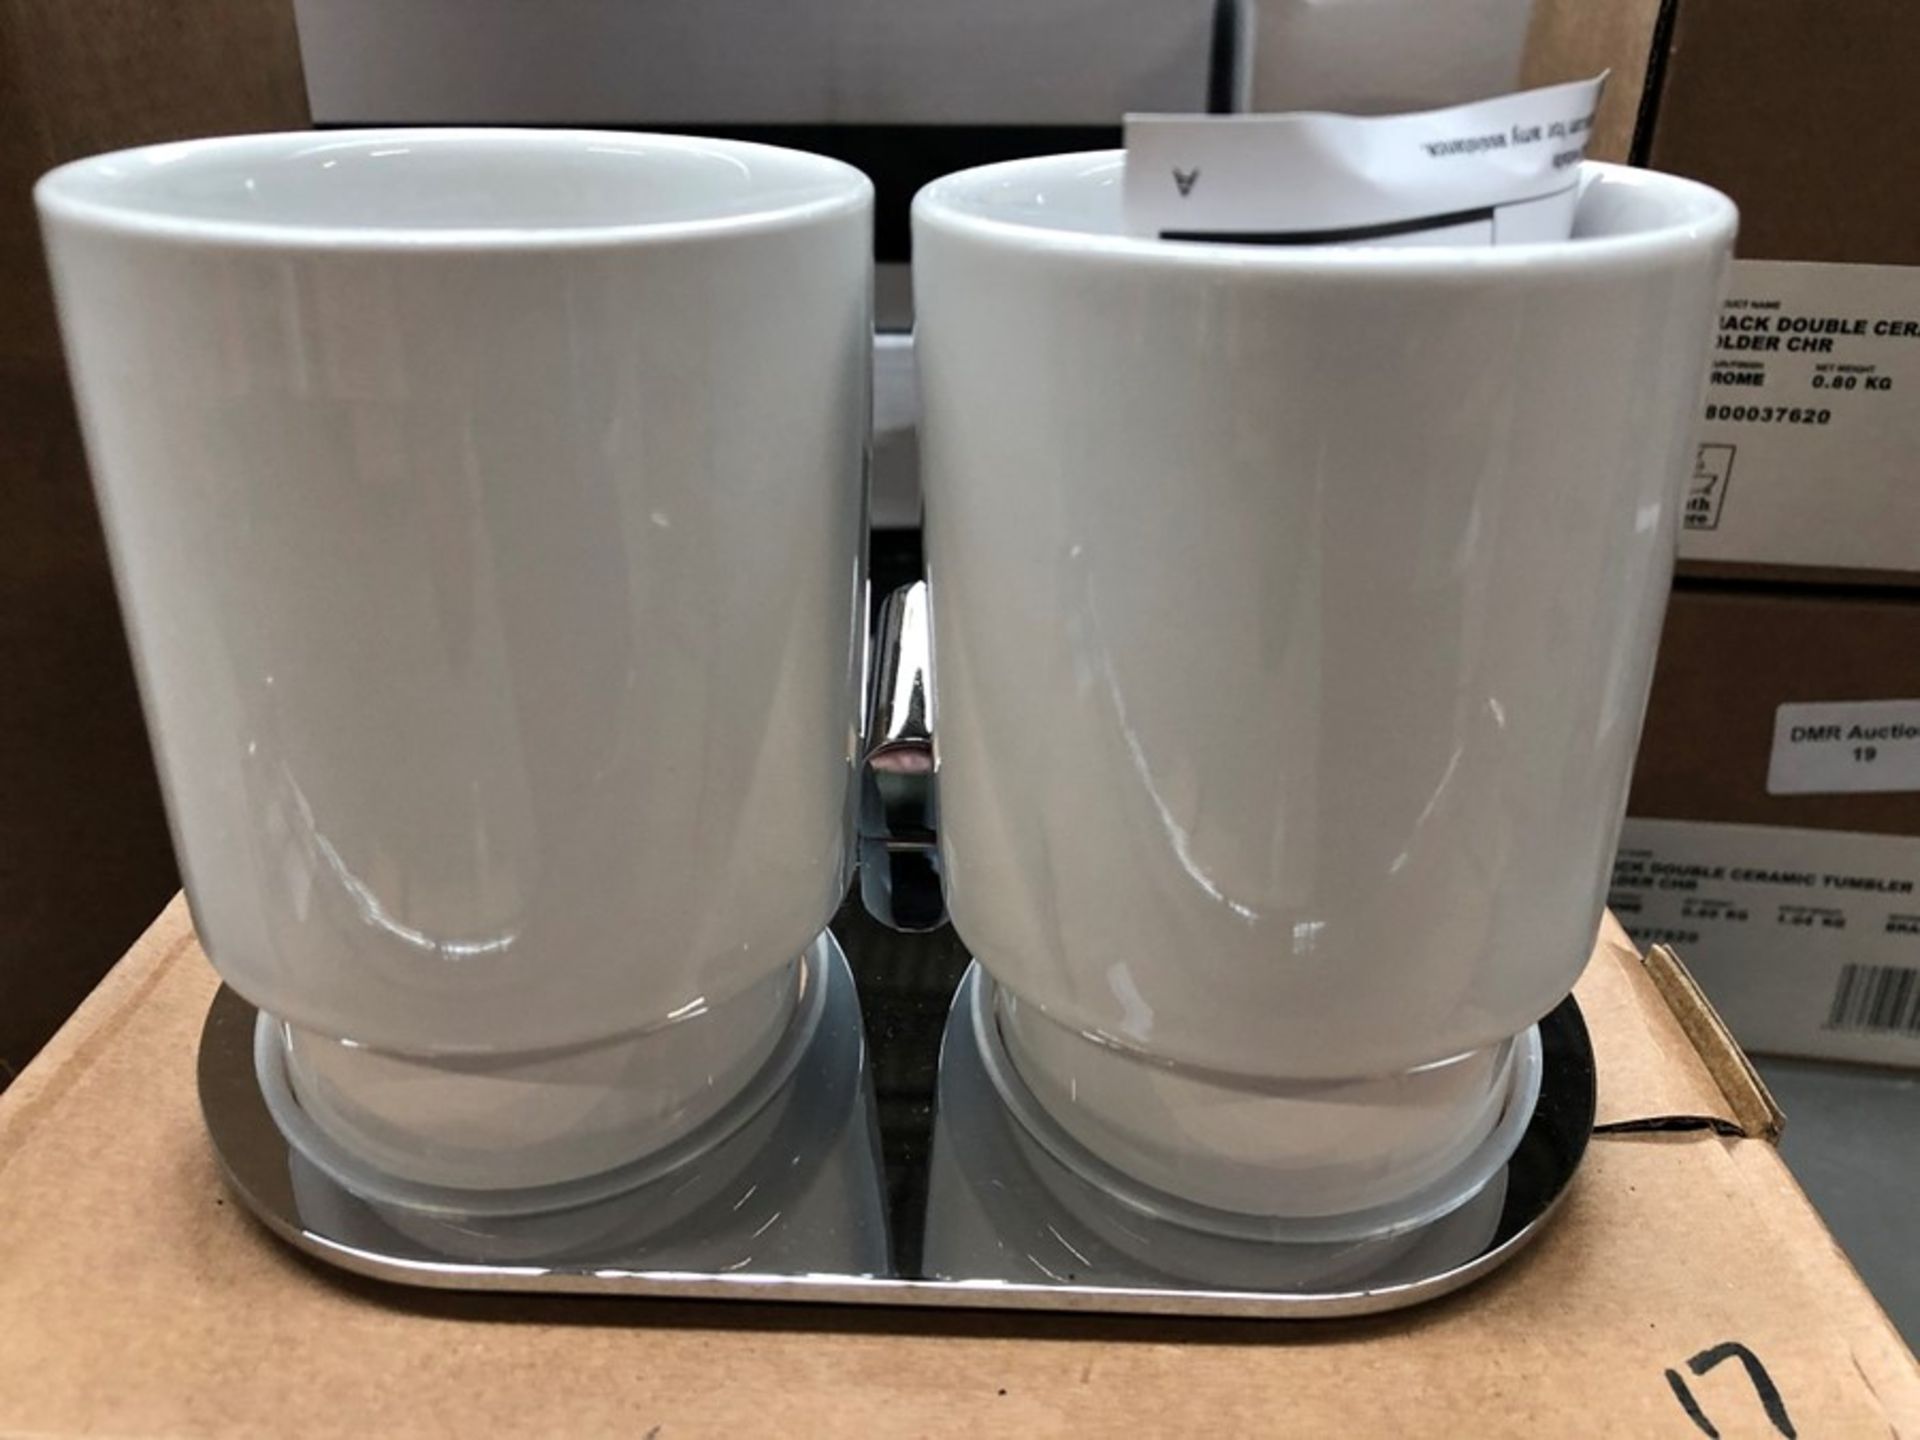 TRACK DOUBLE WALL HUNG CERAMIC TUMBLER SET. RRP £95 - Image 2 of 2